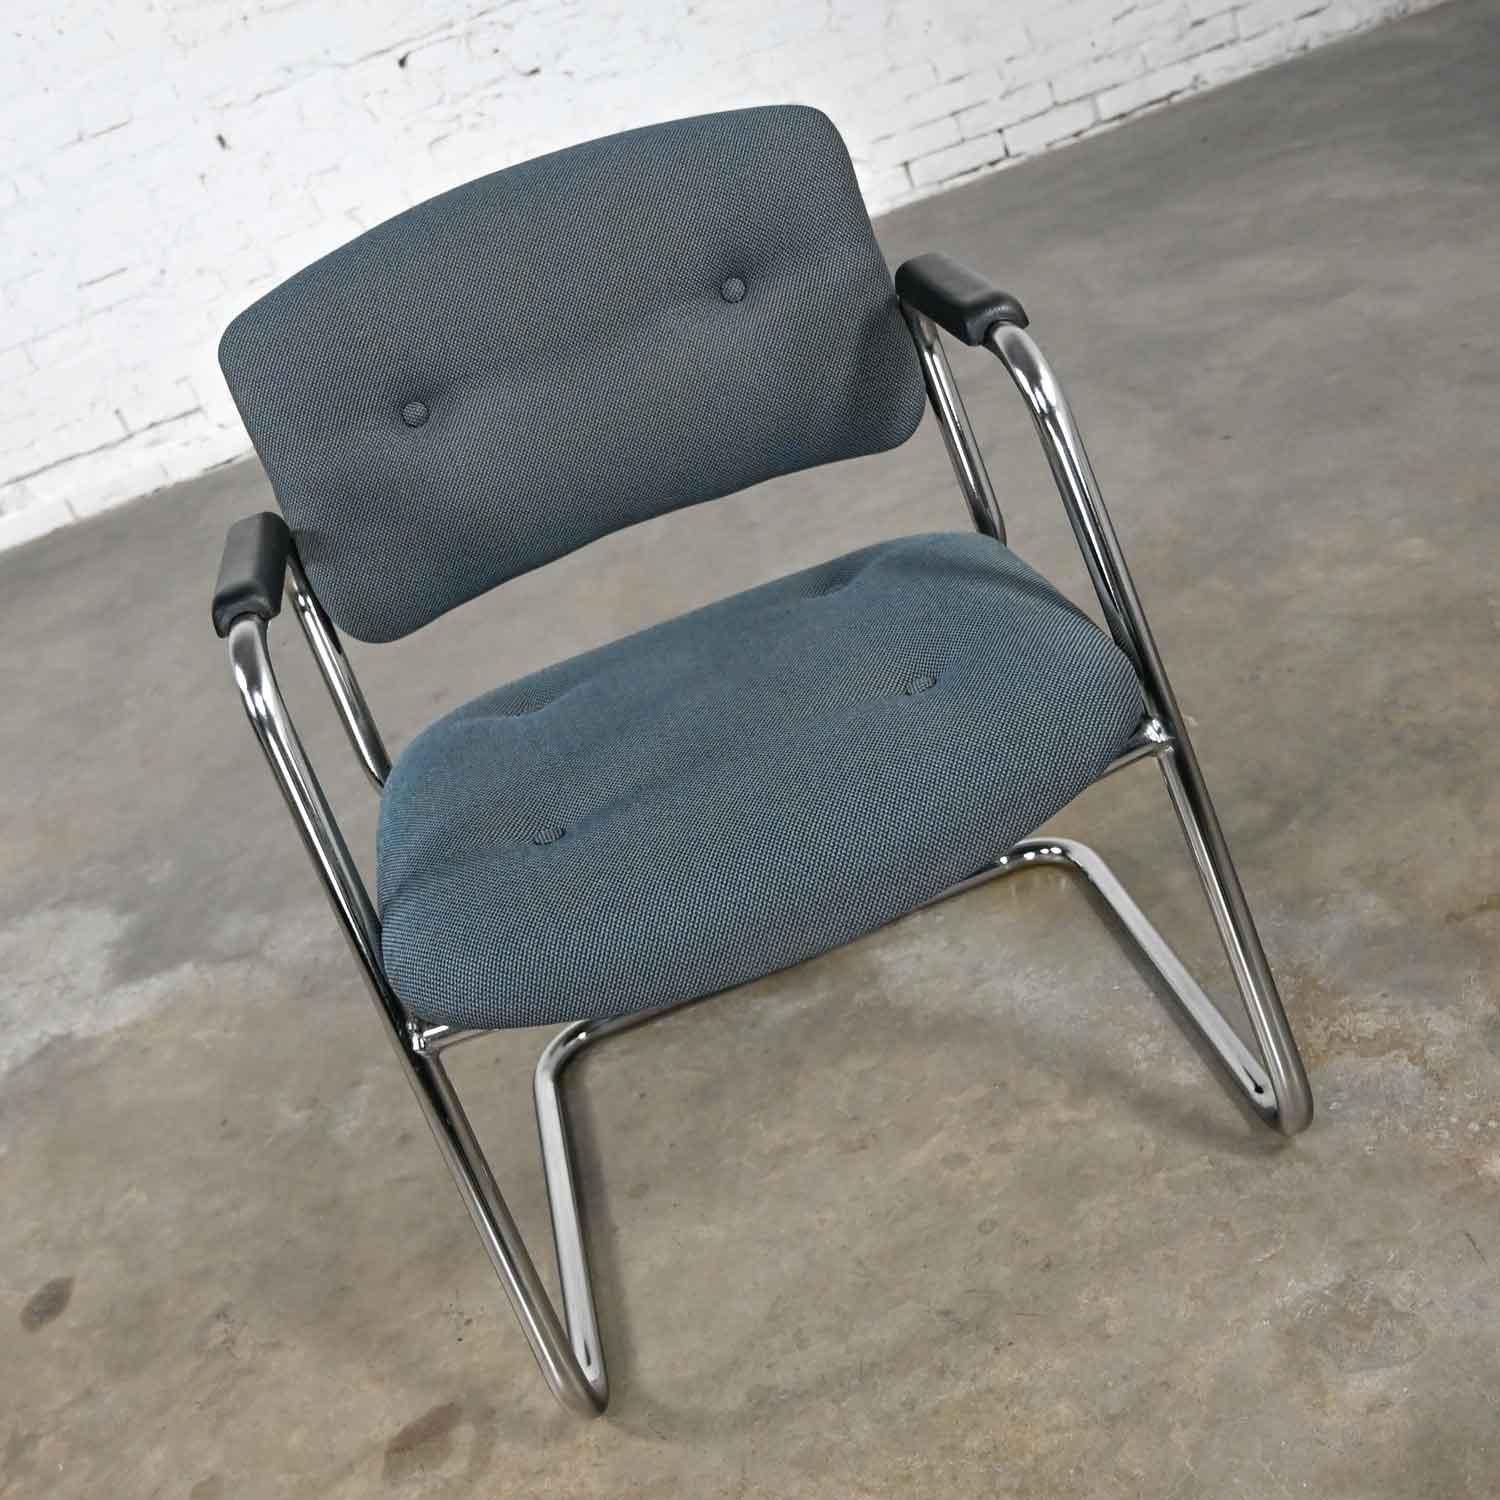 Awesome gray-blue & chrome vintage cantilever chairs by United Chair Company in the style of steelcase. Comprised of a chrome cantilever frame, black plastic armrests, and their original teal & gray tweed fabric with button details. We have 99